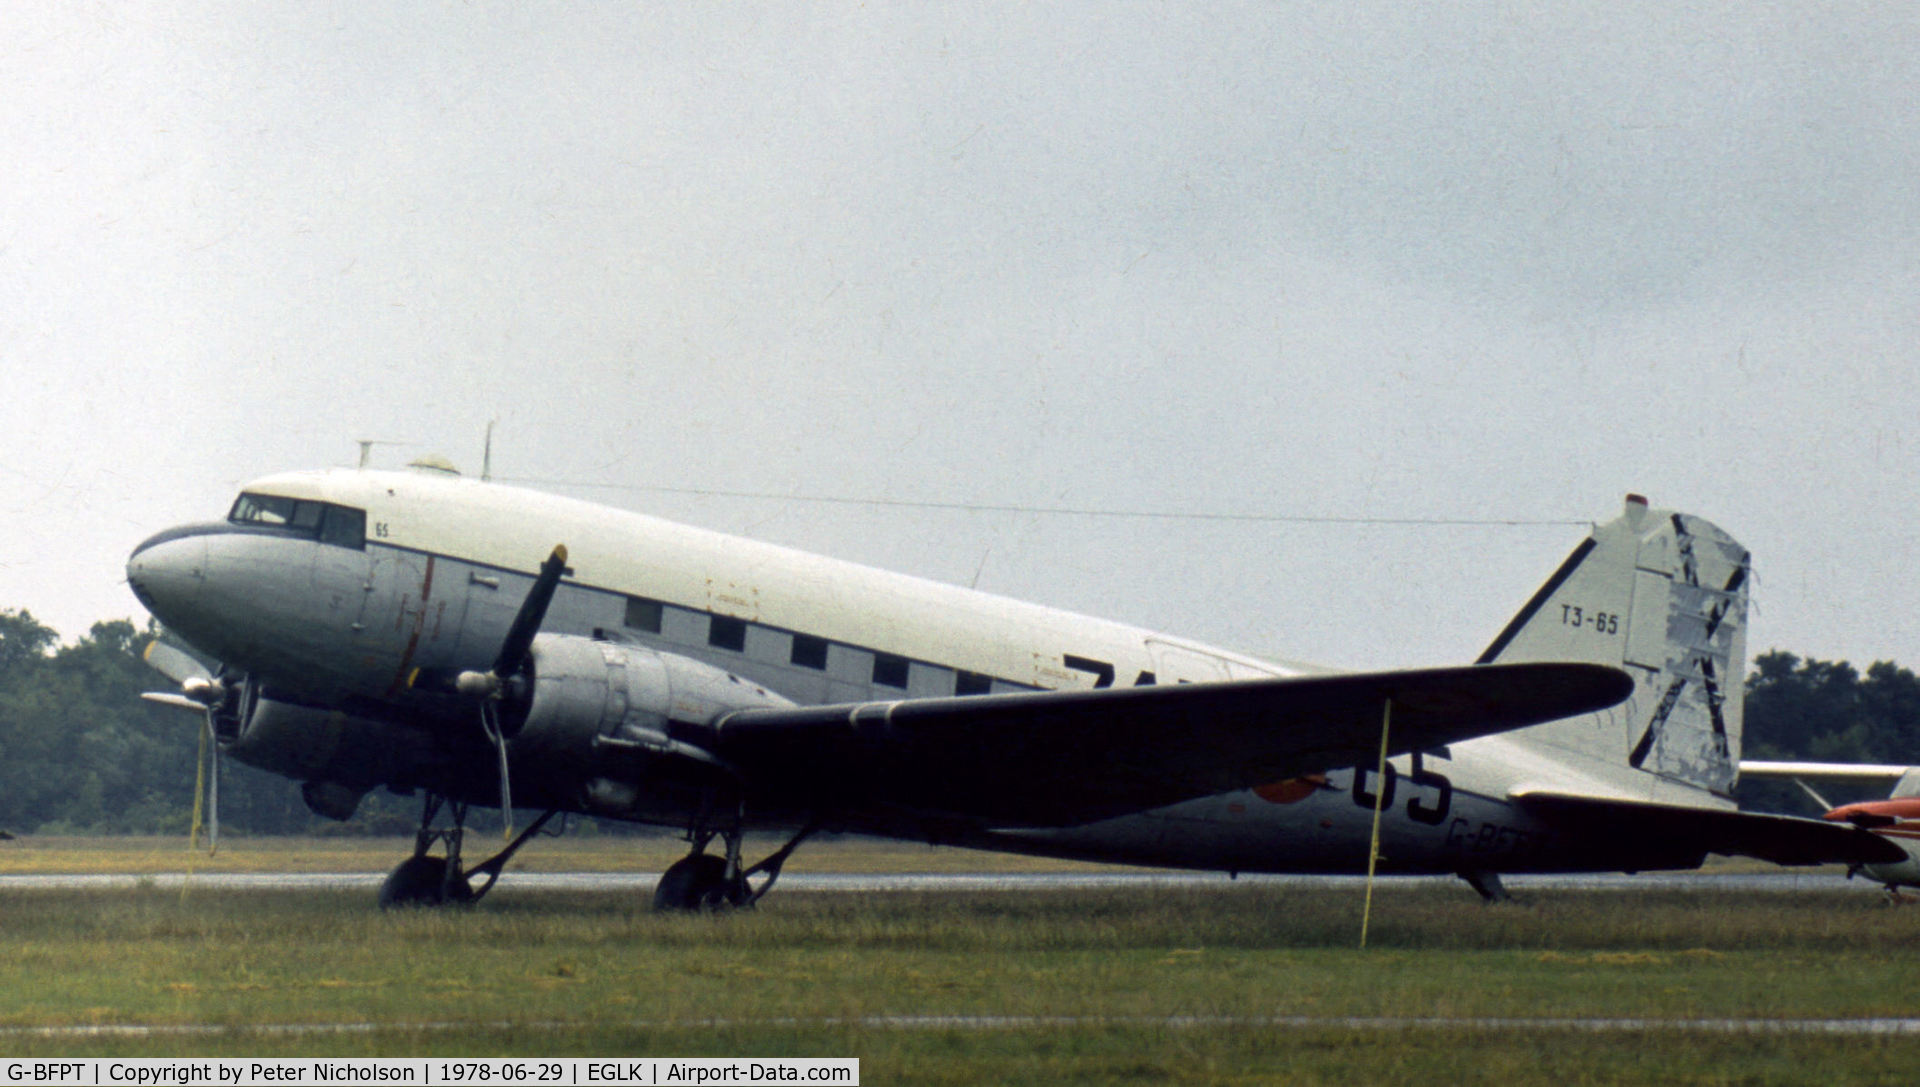 G-BFPT, 1943 Douglas C-47A Skytrain (DC-3) C/N 19268, This former Spanish Air Force C-47A was resident at Blackbushe in the Summer of 1978.